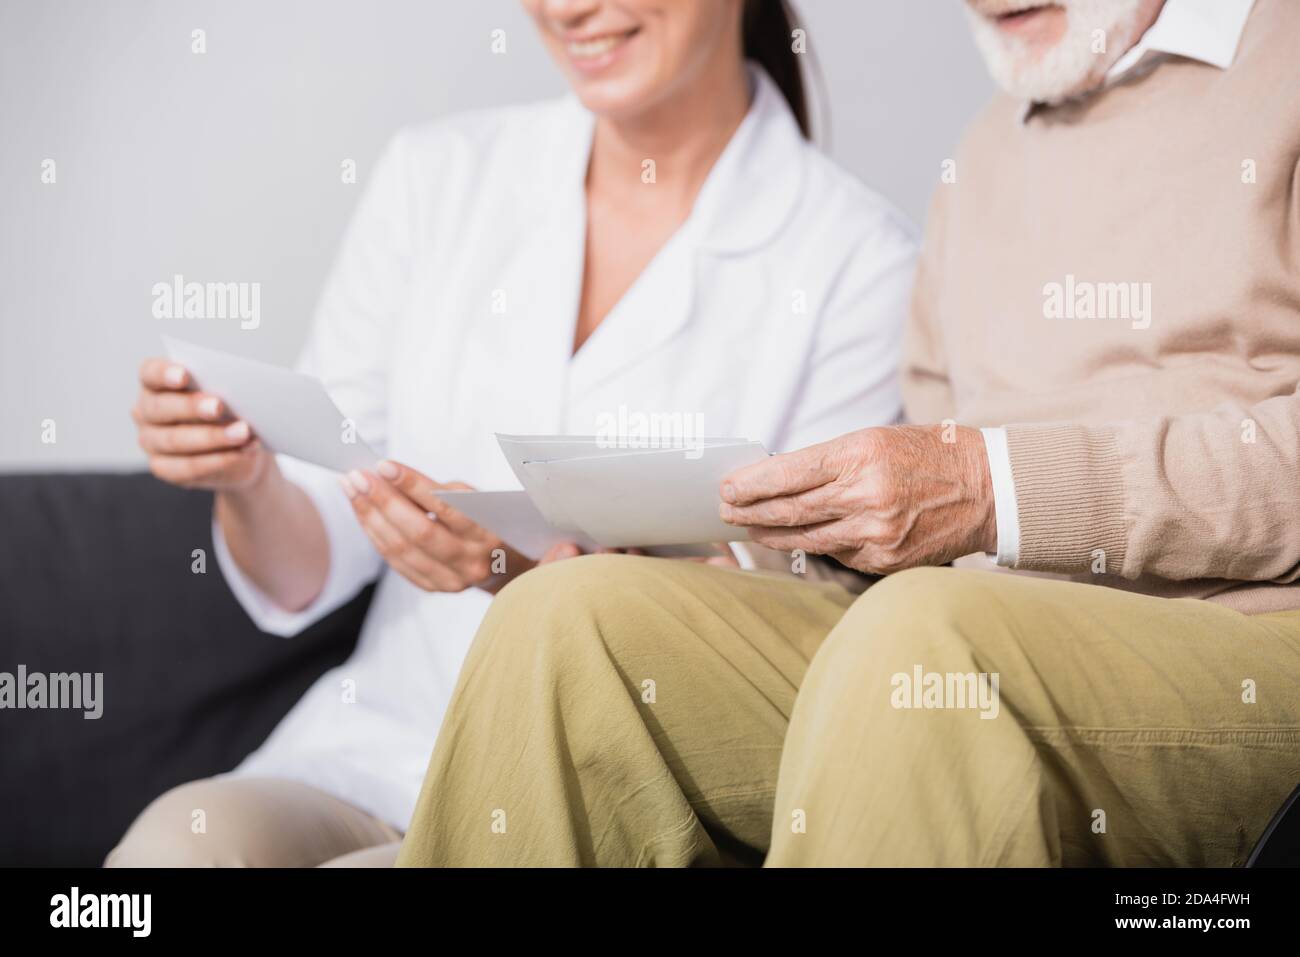 social worker showing photos to aged man on blurred background Stock Photo